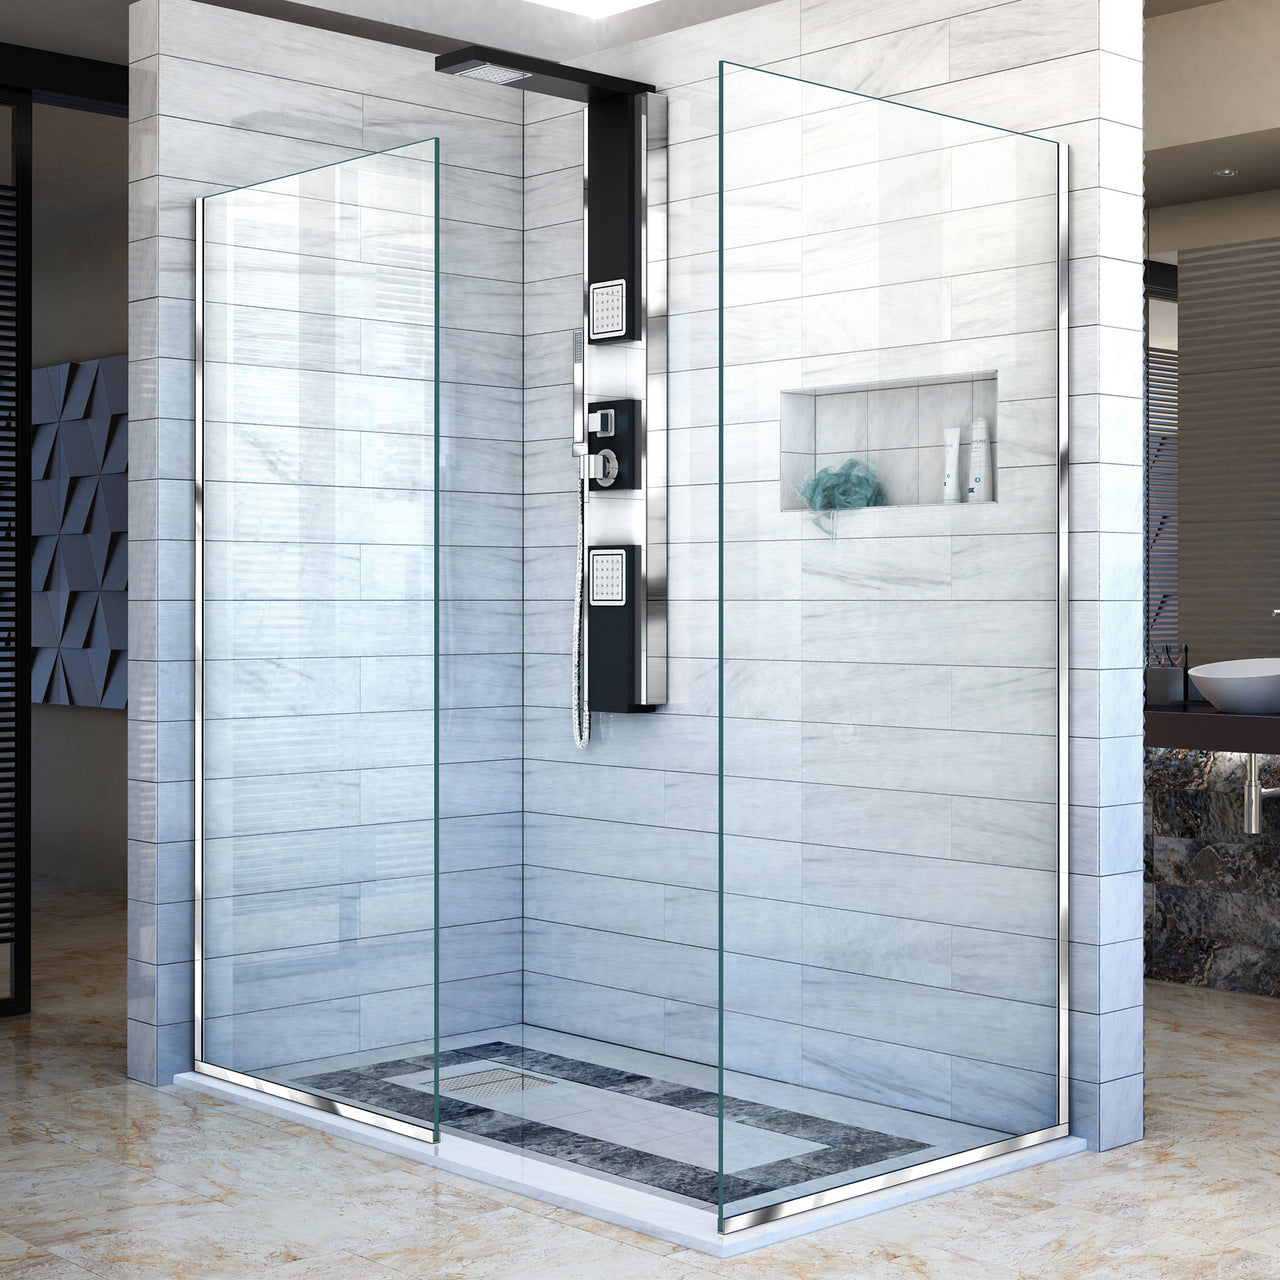 DreamLine Linea Two Individual Frameless Shower Screens 30 in. and 34 in. W x 72 in. H, Open Entry Design - BNGBath